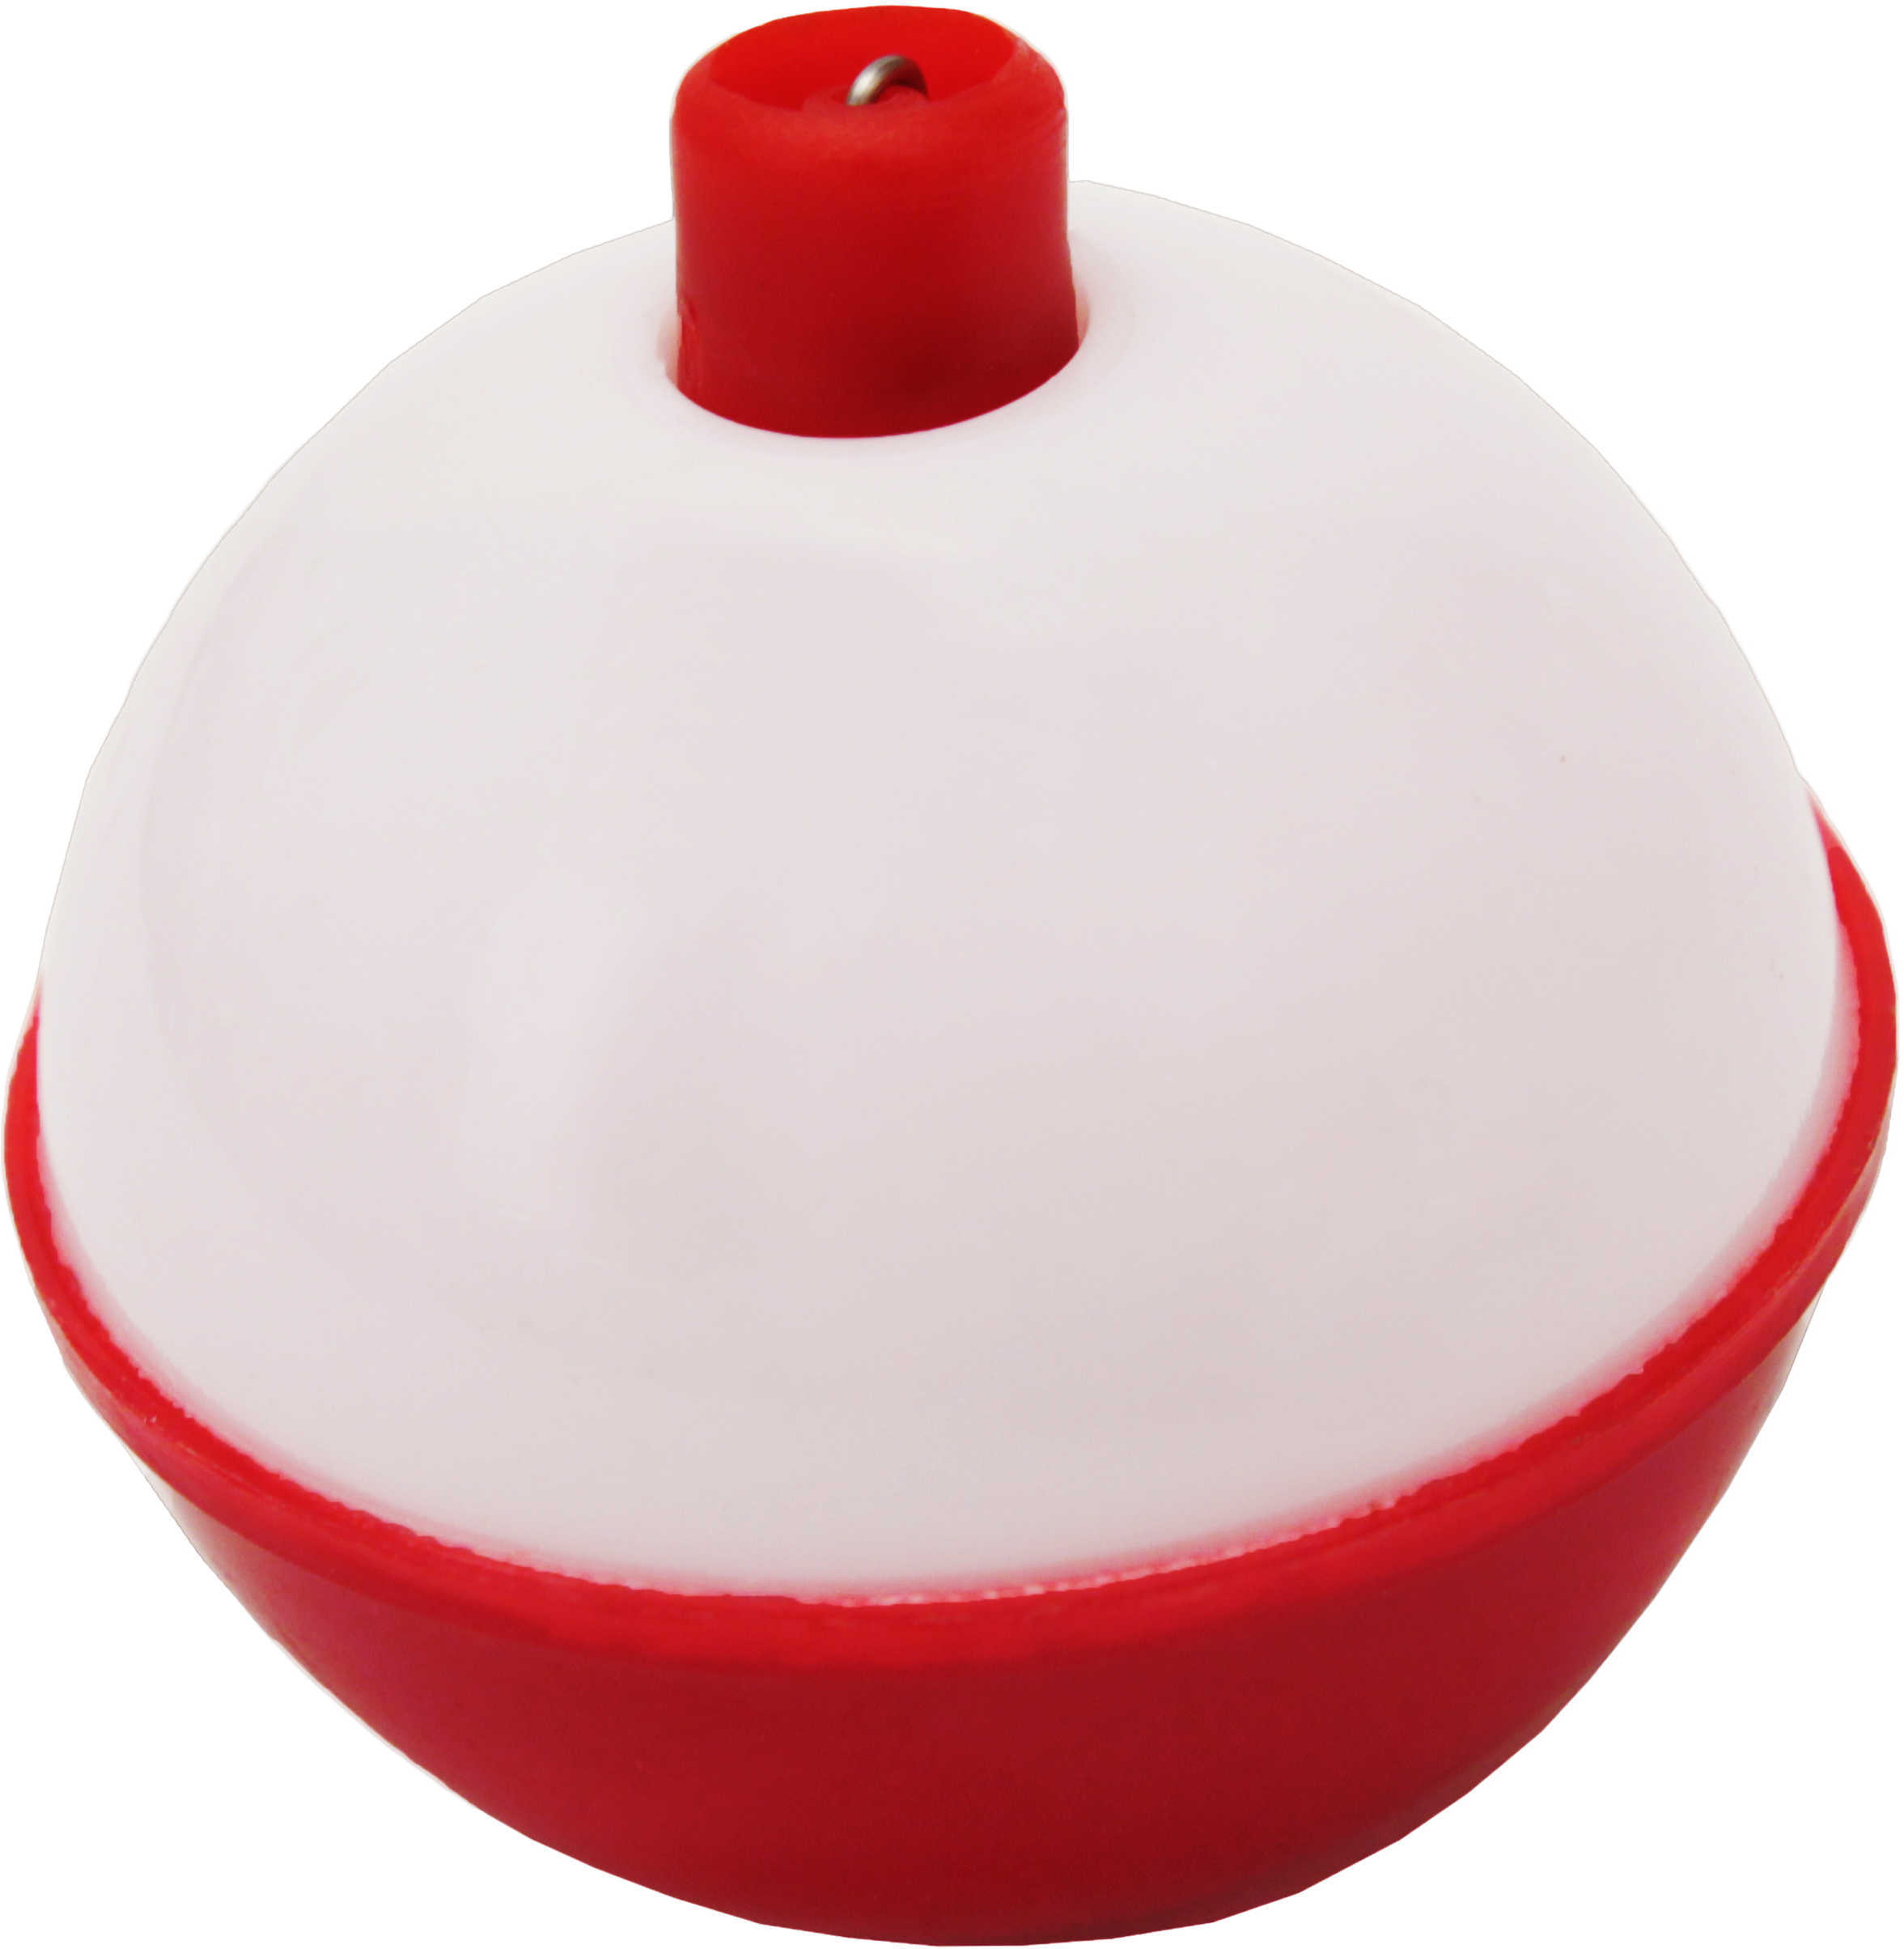 Eagle Claw Fishing Tackle Plastic Bobber-Red - White 1 3/4in 2/pk Snap-On Md#: 07020-005